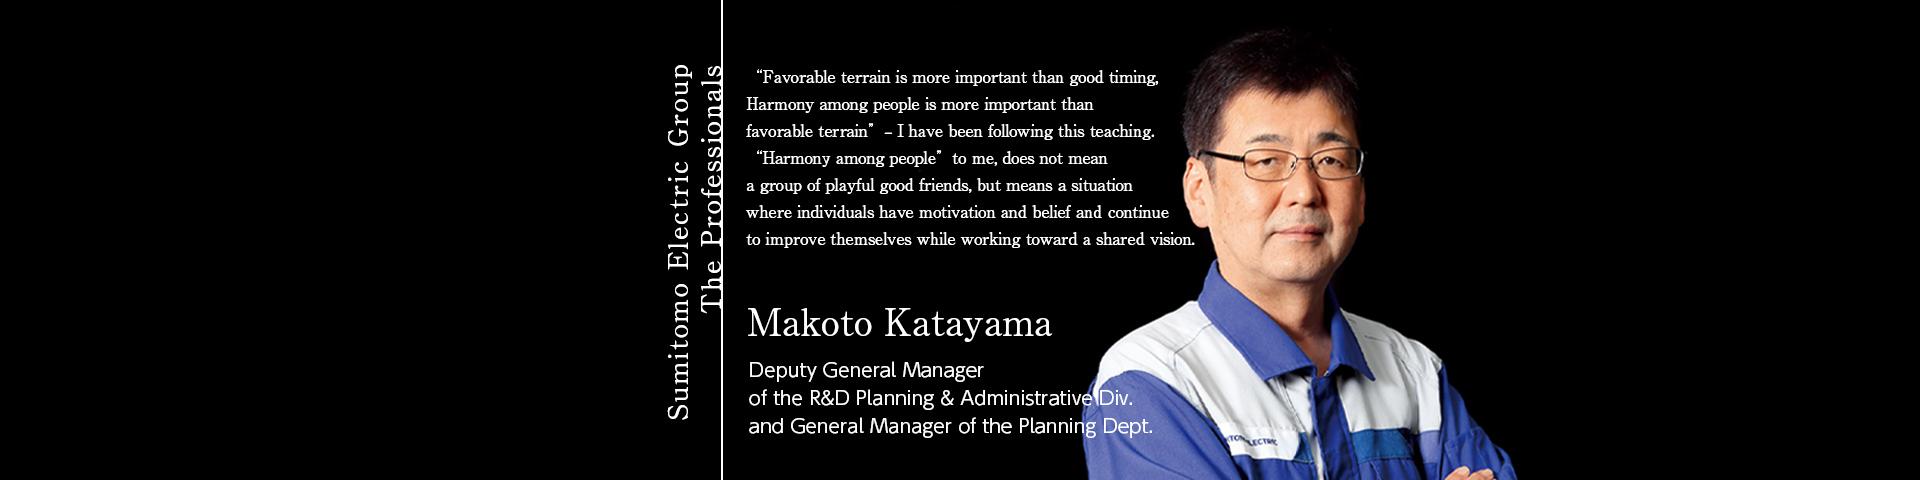 Sumitomo Electric Group The Professionals ~Makoto Katayama Deputy General Manager of the R&D Planning & Administrative Div. and General Manager of the Planning Dept.~ 